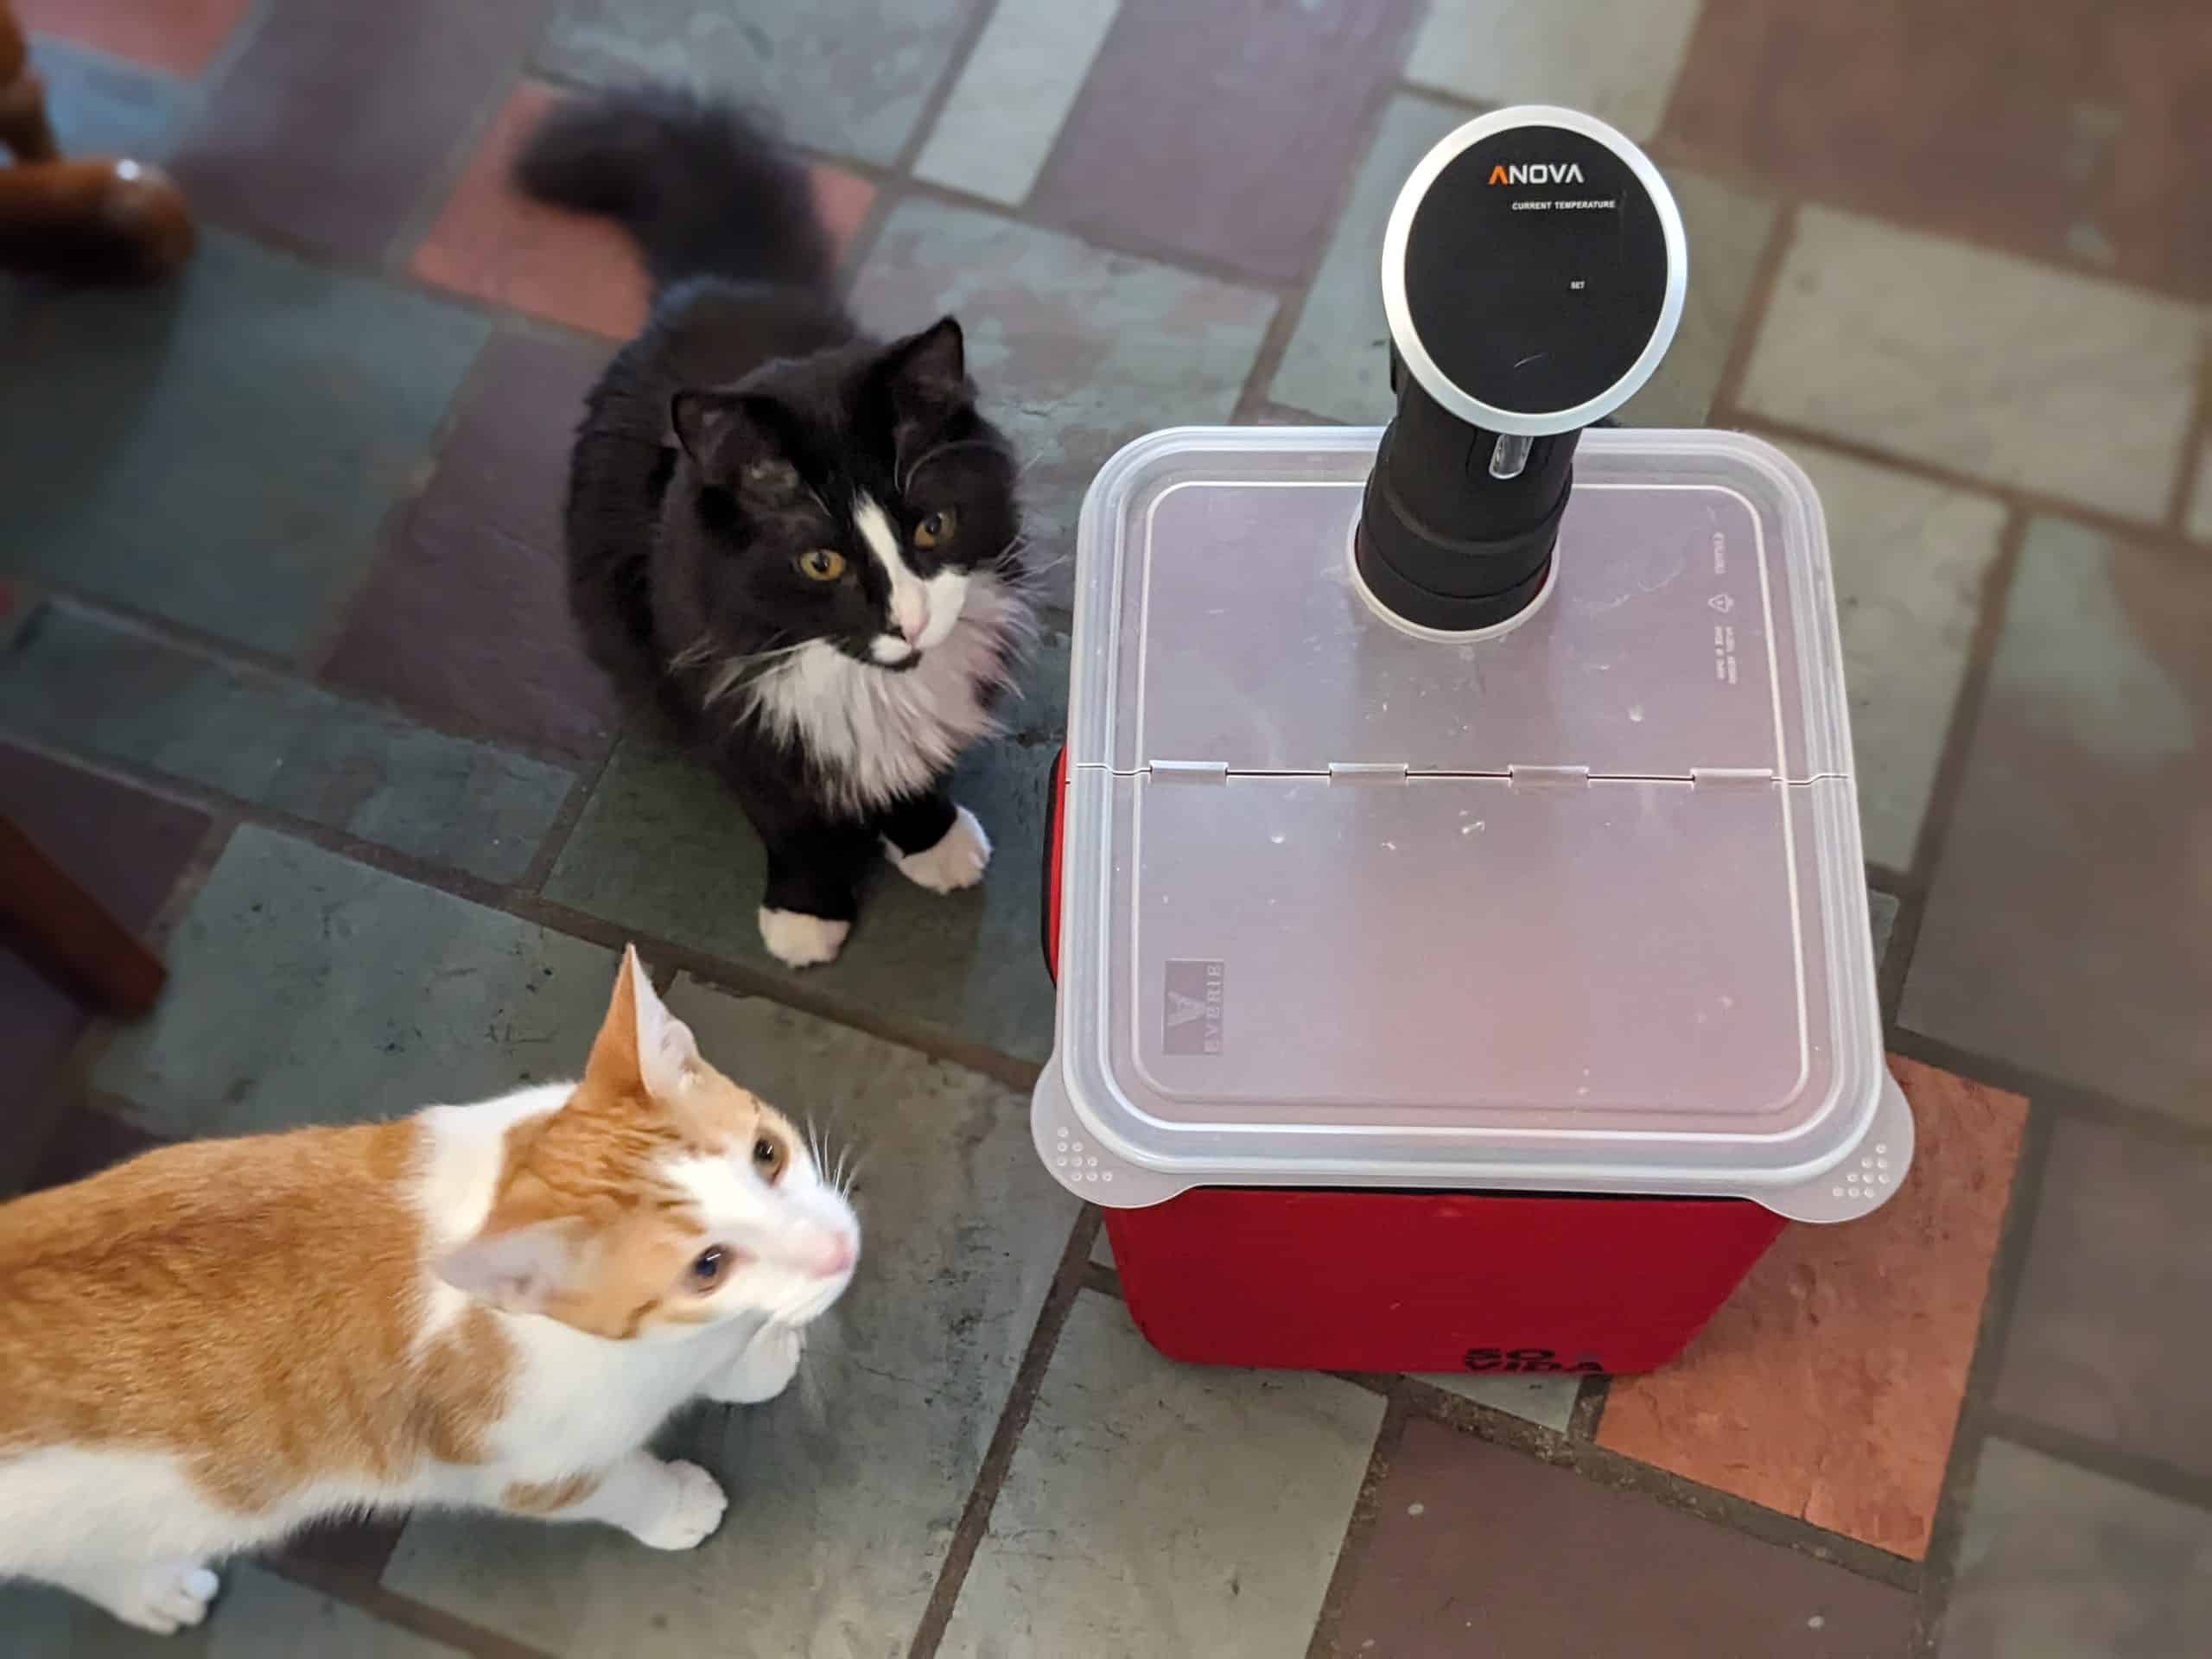 Sous vide cooker and container with two cats nearby